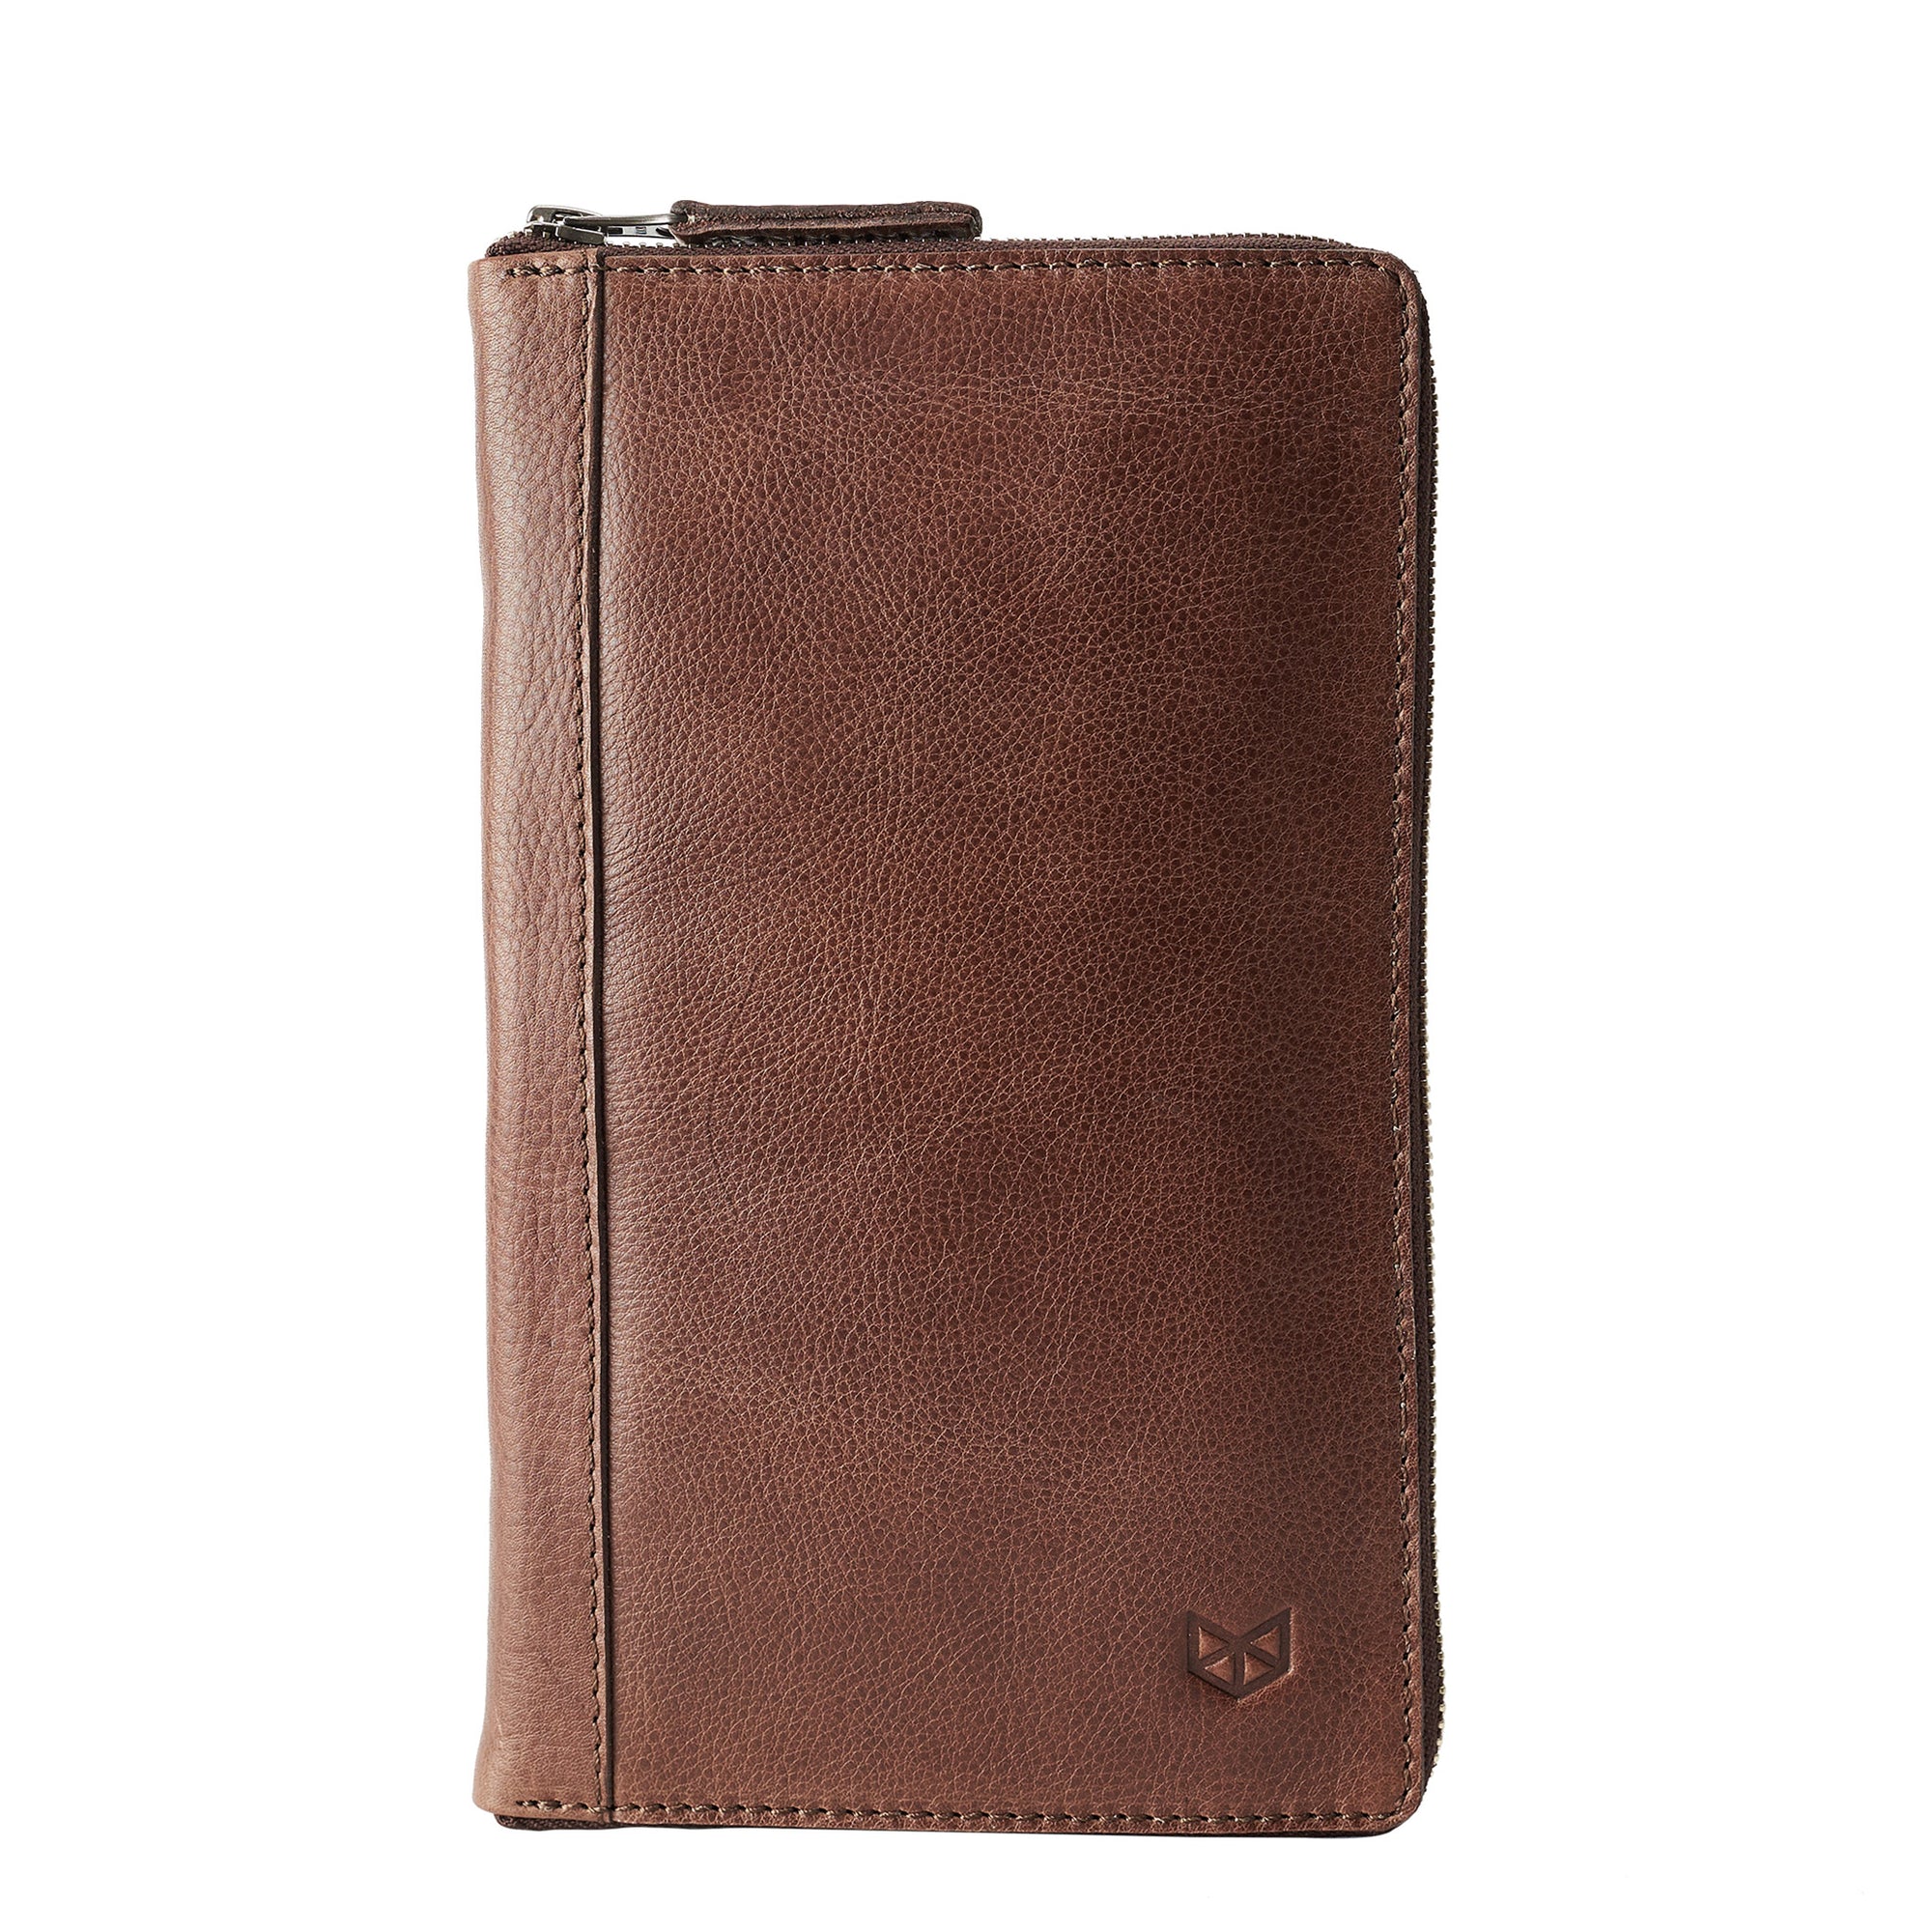 Front brown leather passport wallet. Perfect for travelers. Gift for men by Capra Leather.